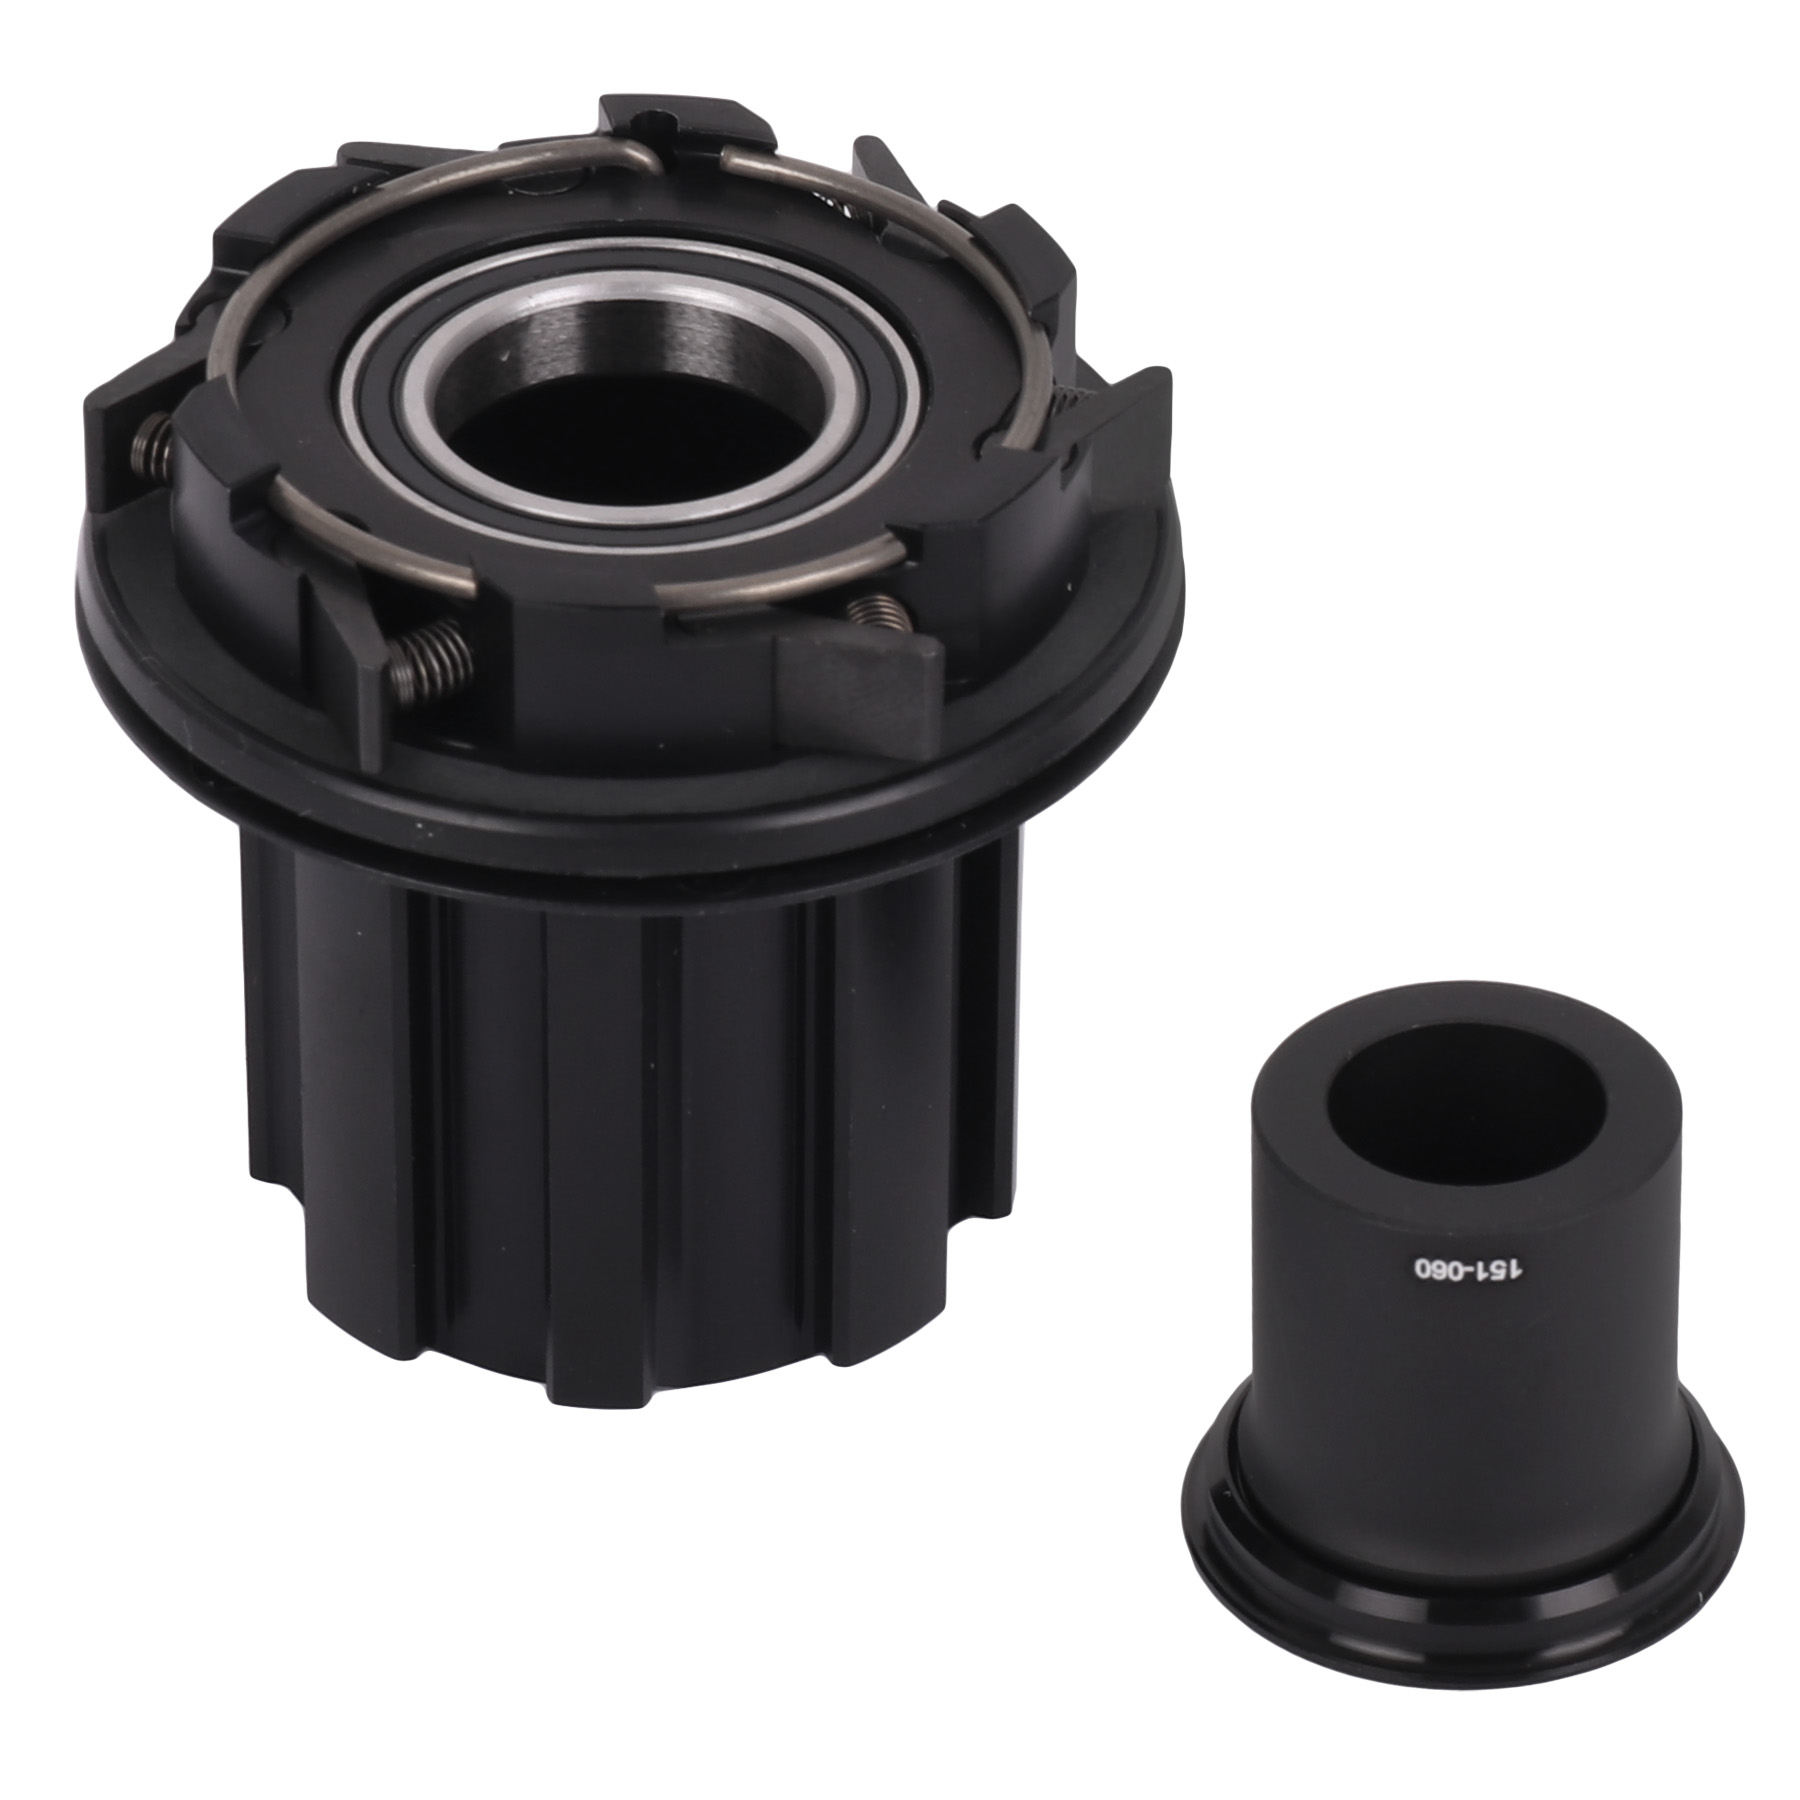 Picture of ZIPP Freehub Kit for ZR1 Disc Rear Hubs - 11.2018.065.010 | Campagnolo N3W